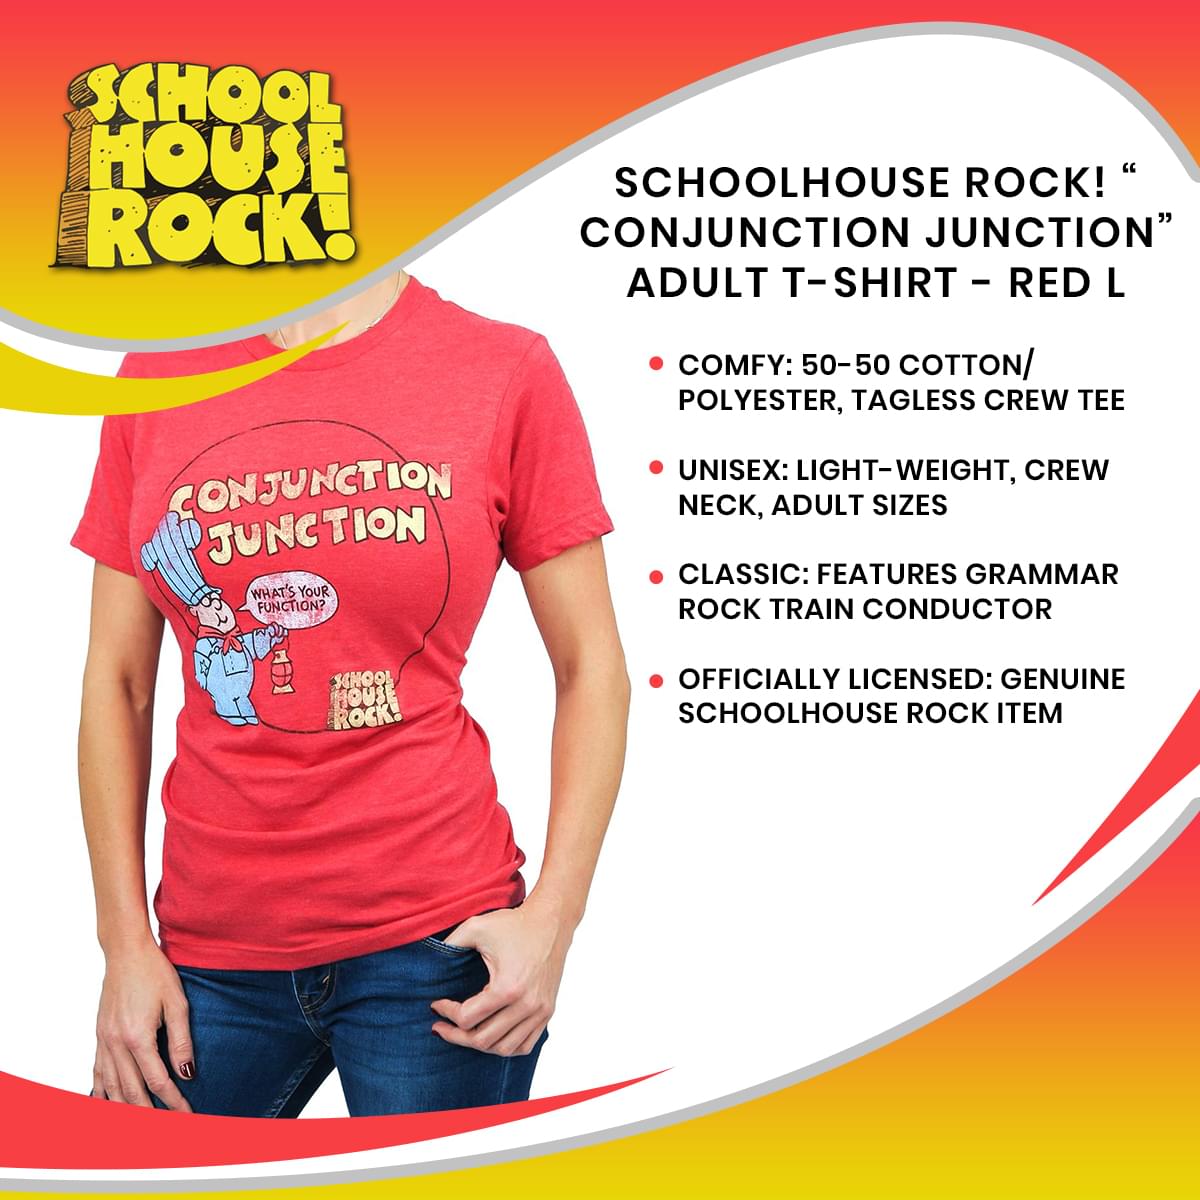 Schoolhouse Rock! “Conjunction Junction” Adult T-Shirt - Red